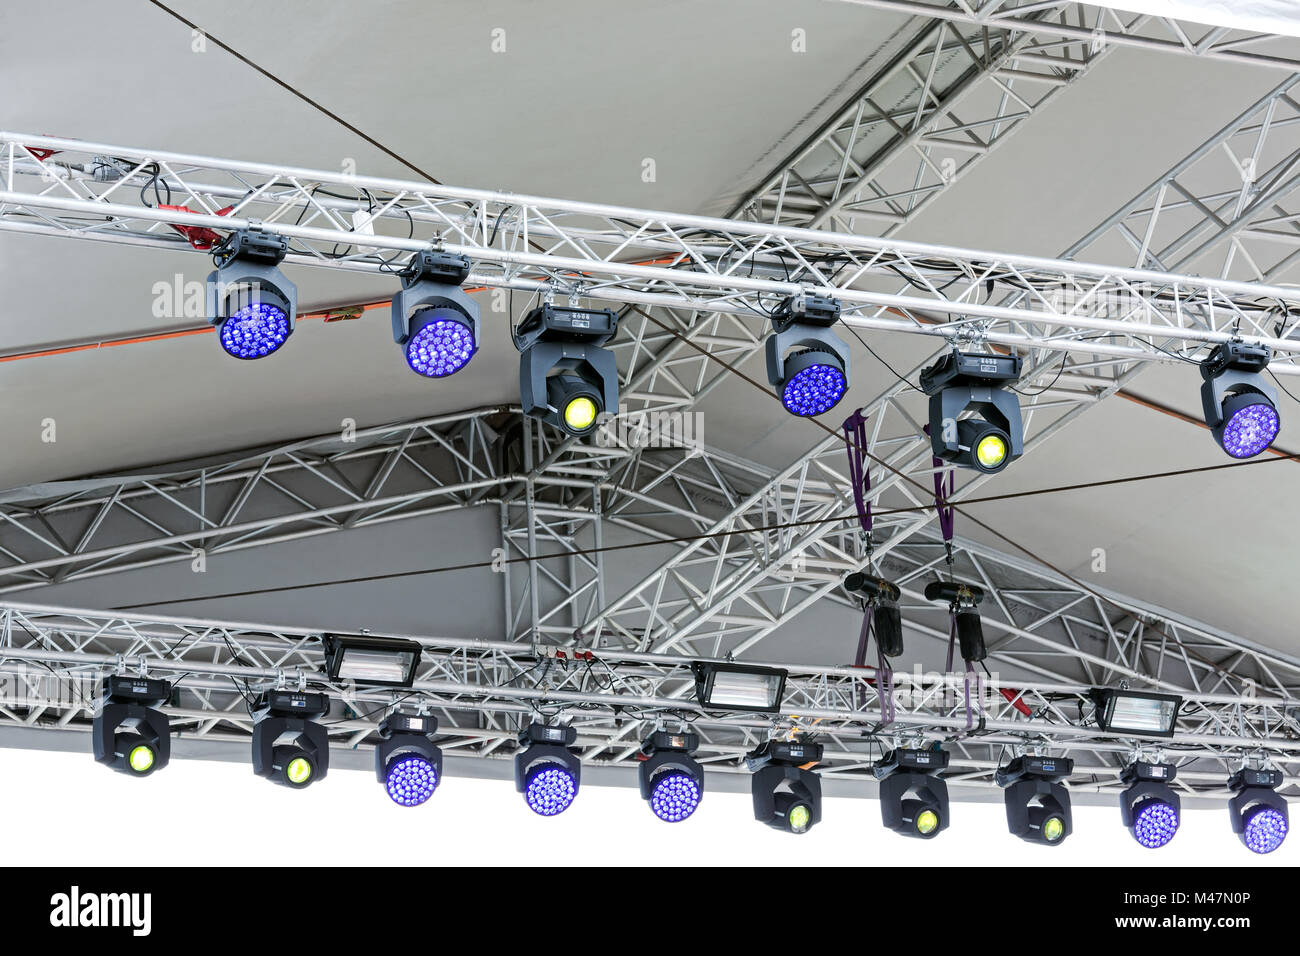 concert spotlights on outdoor stage Stock Photo